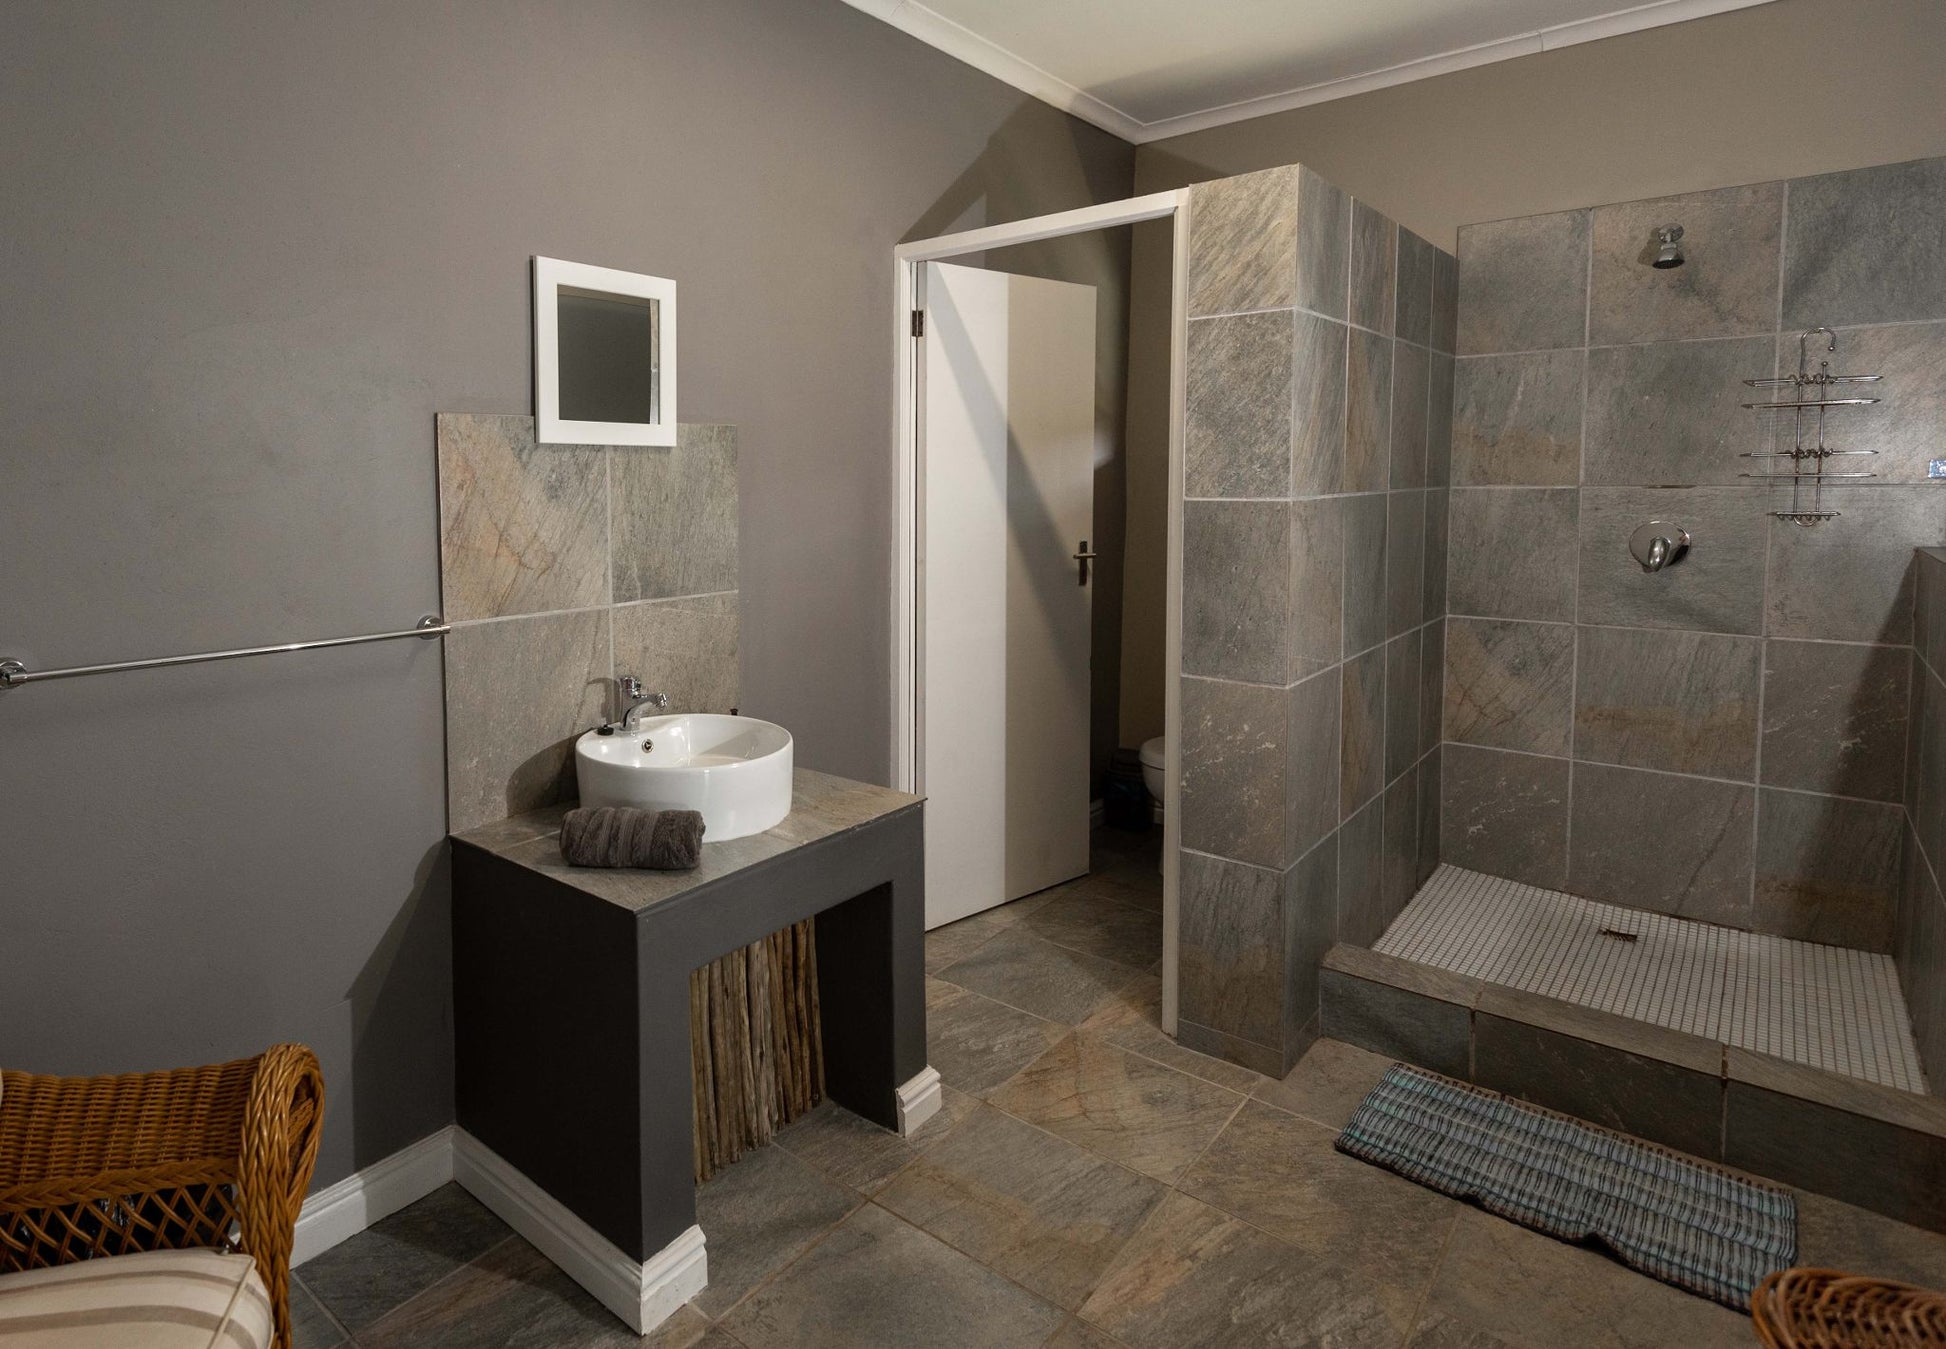 Tenikwa Family Suites The Crags Western Cape South Africa Sepia Tones, Bathroom